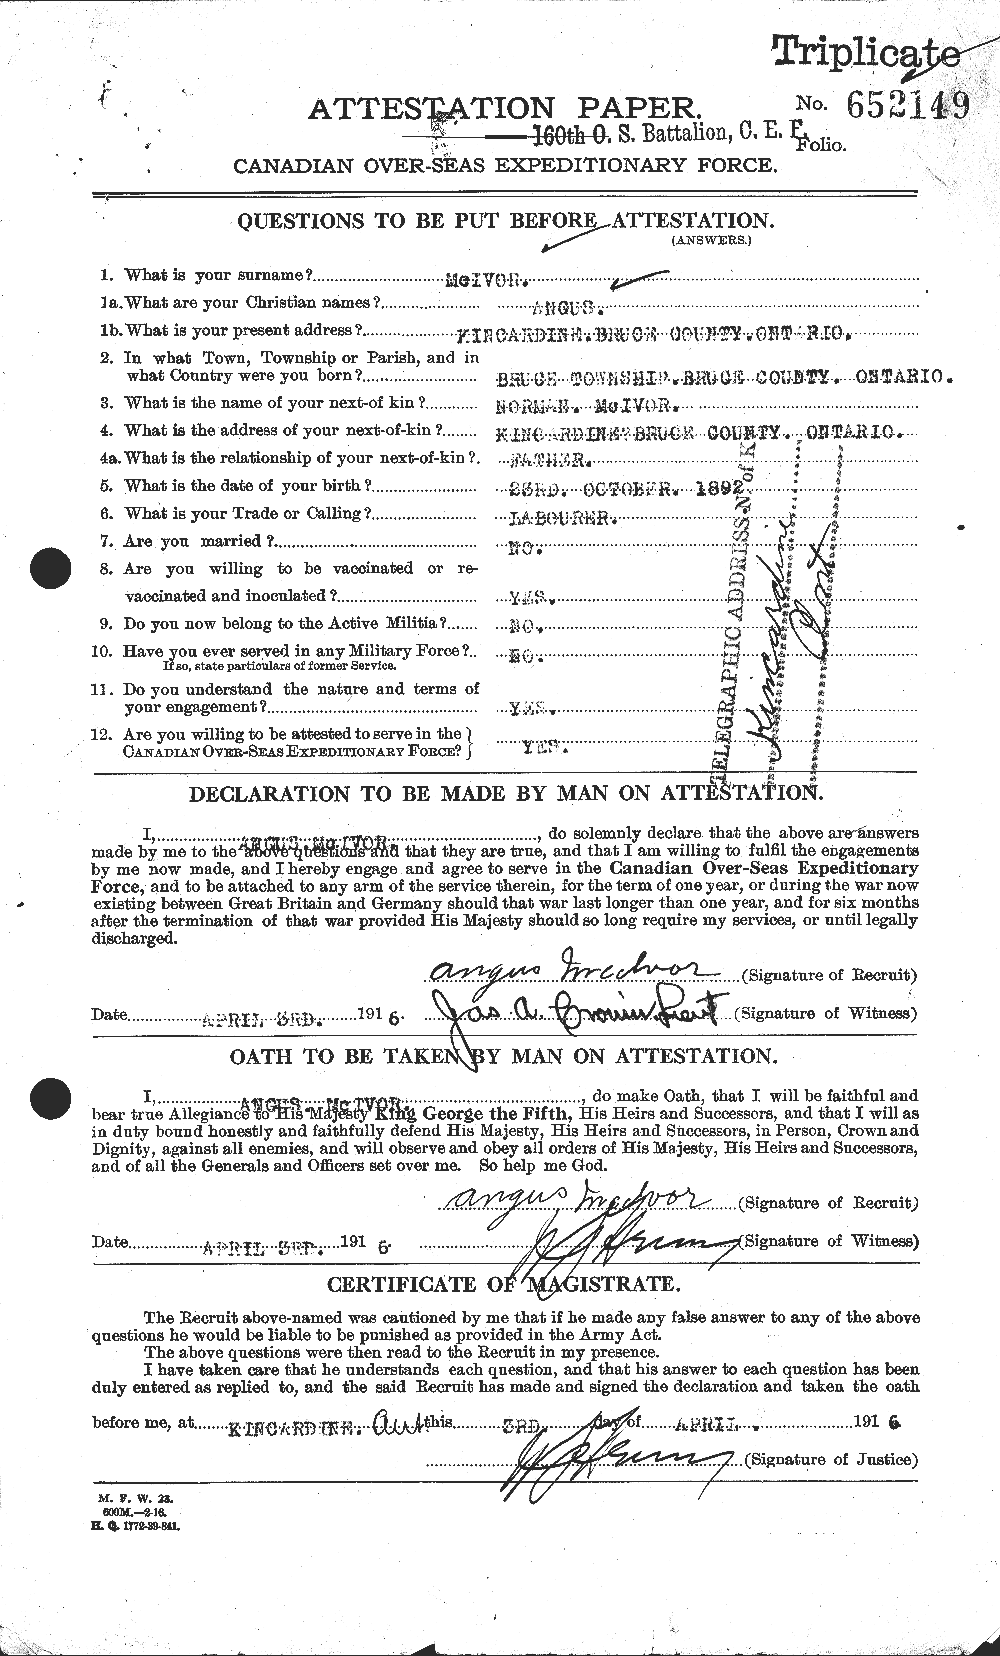 Personnel Records of the First World War - CEF 527903a